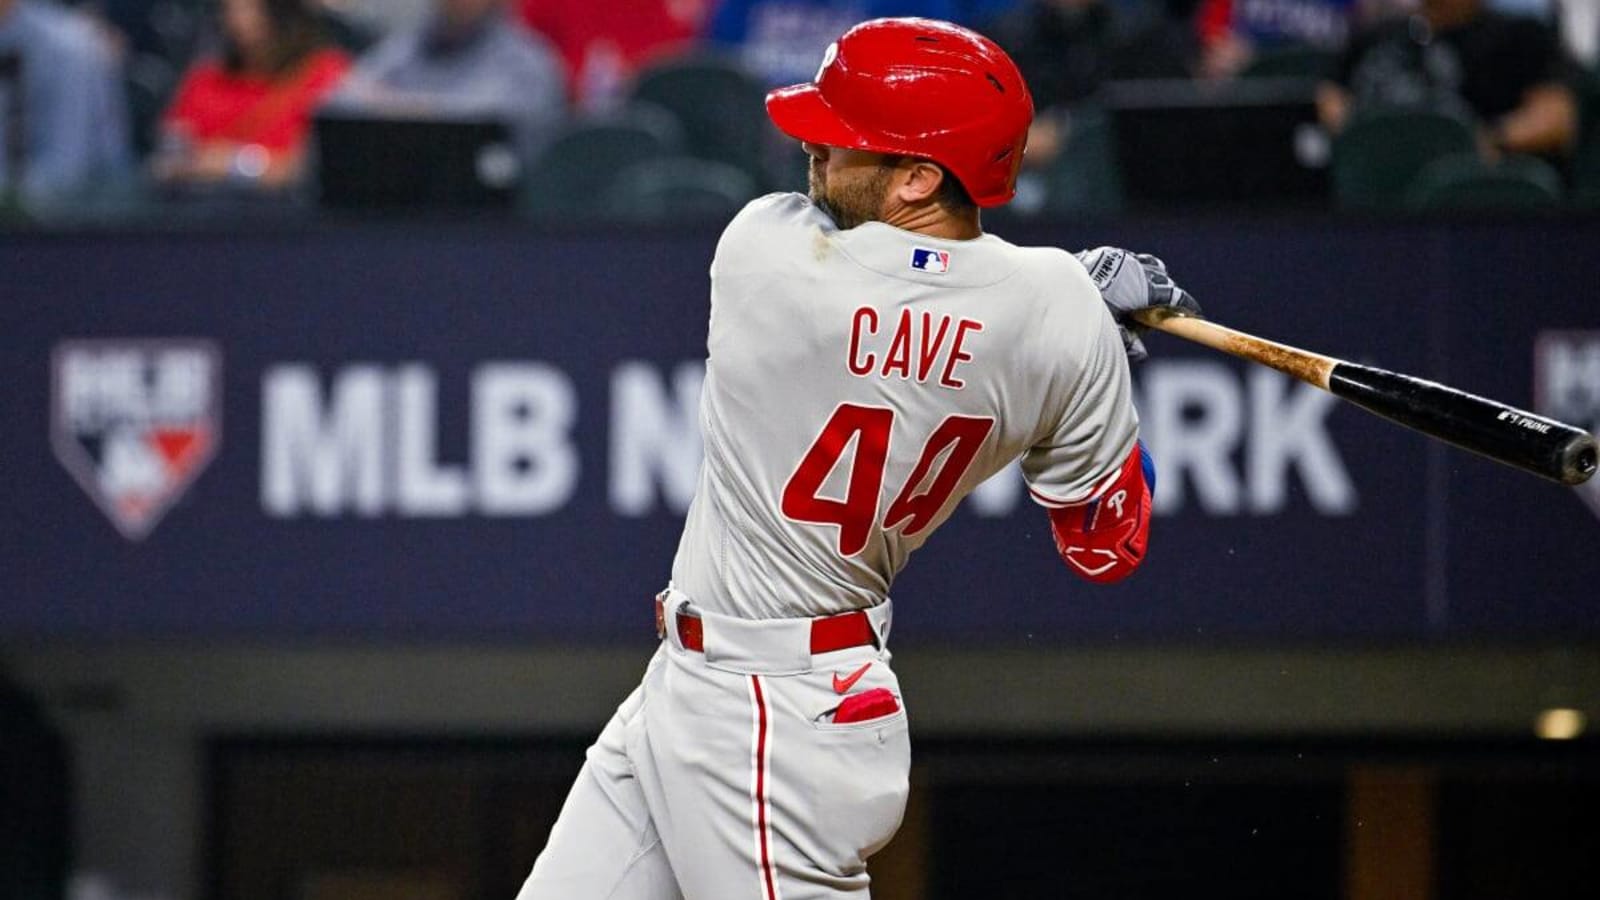 Watch: Cave Hits First Home Run in Phillies Uniform, Sparks Five-Run Inning